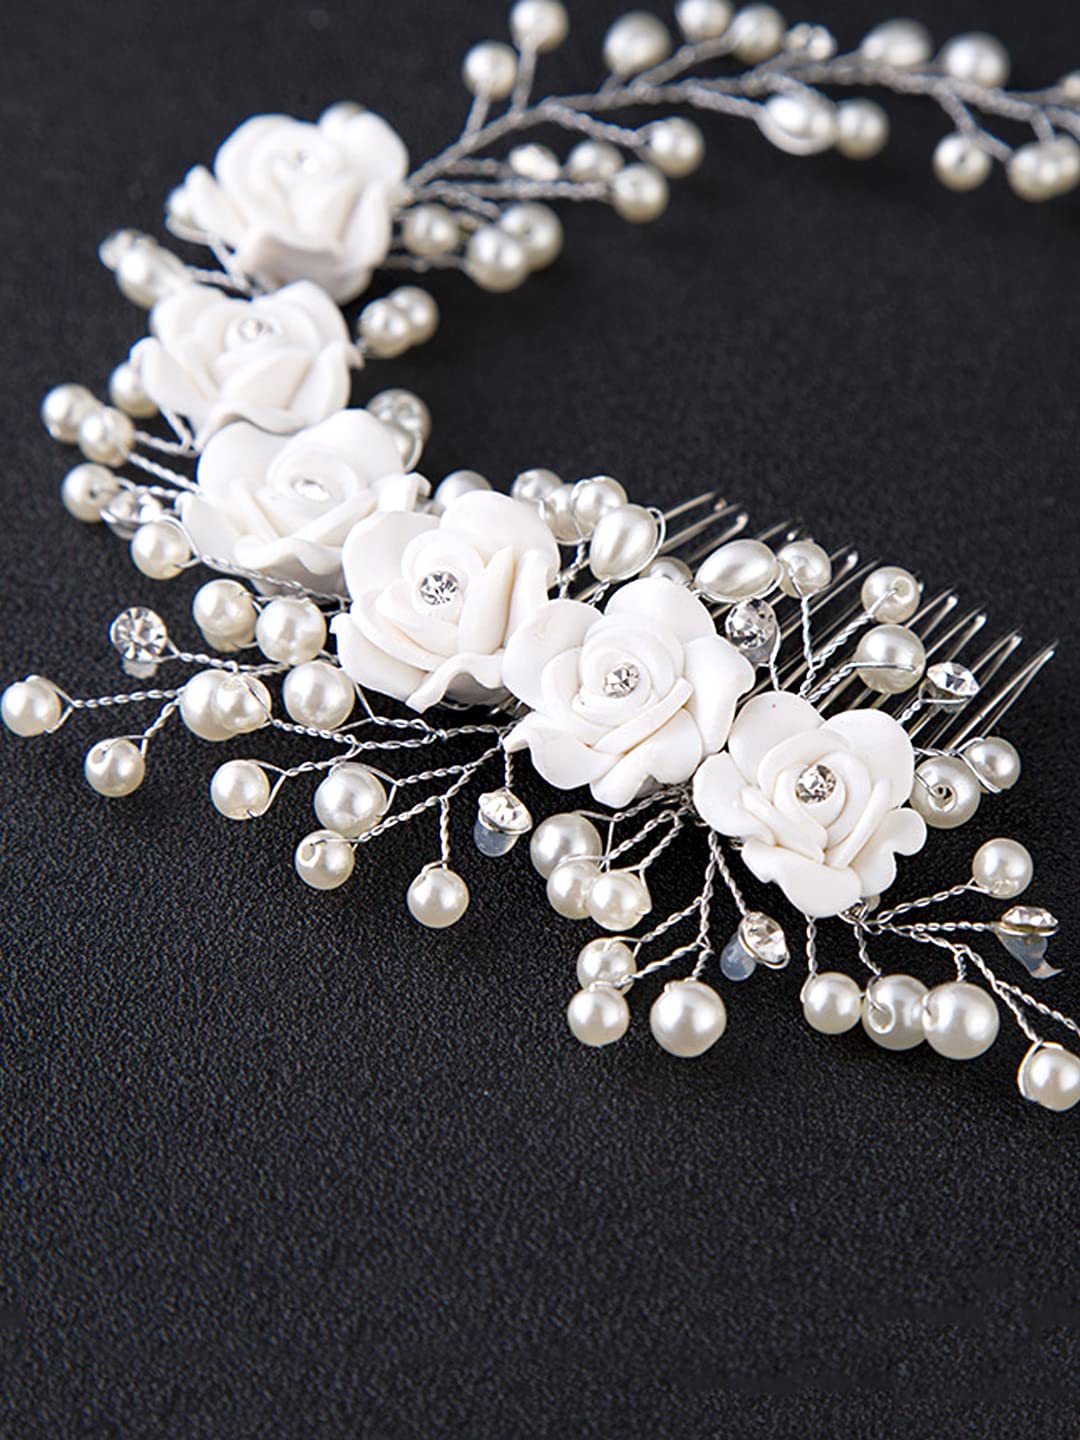 Yellow Chimes Bridal Hair Vine for Women and Girls Bridal Hair Accessories for Wedding White Headband Hair Accessories Wedding Jewellery for Women Floral Pearl Bridal Wedding Head band Hair Vine for Girls